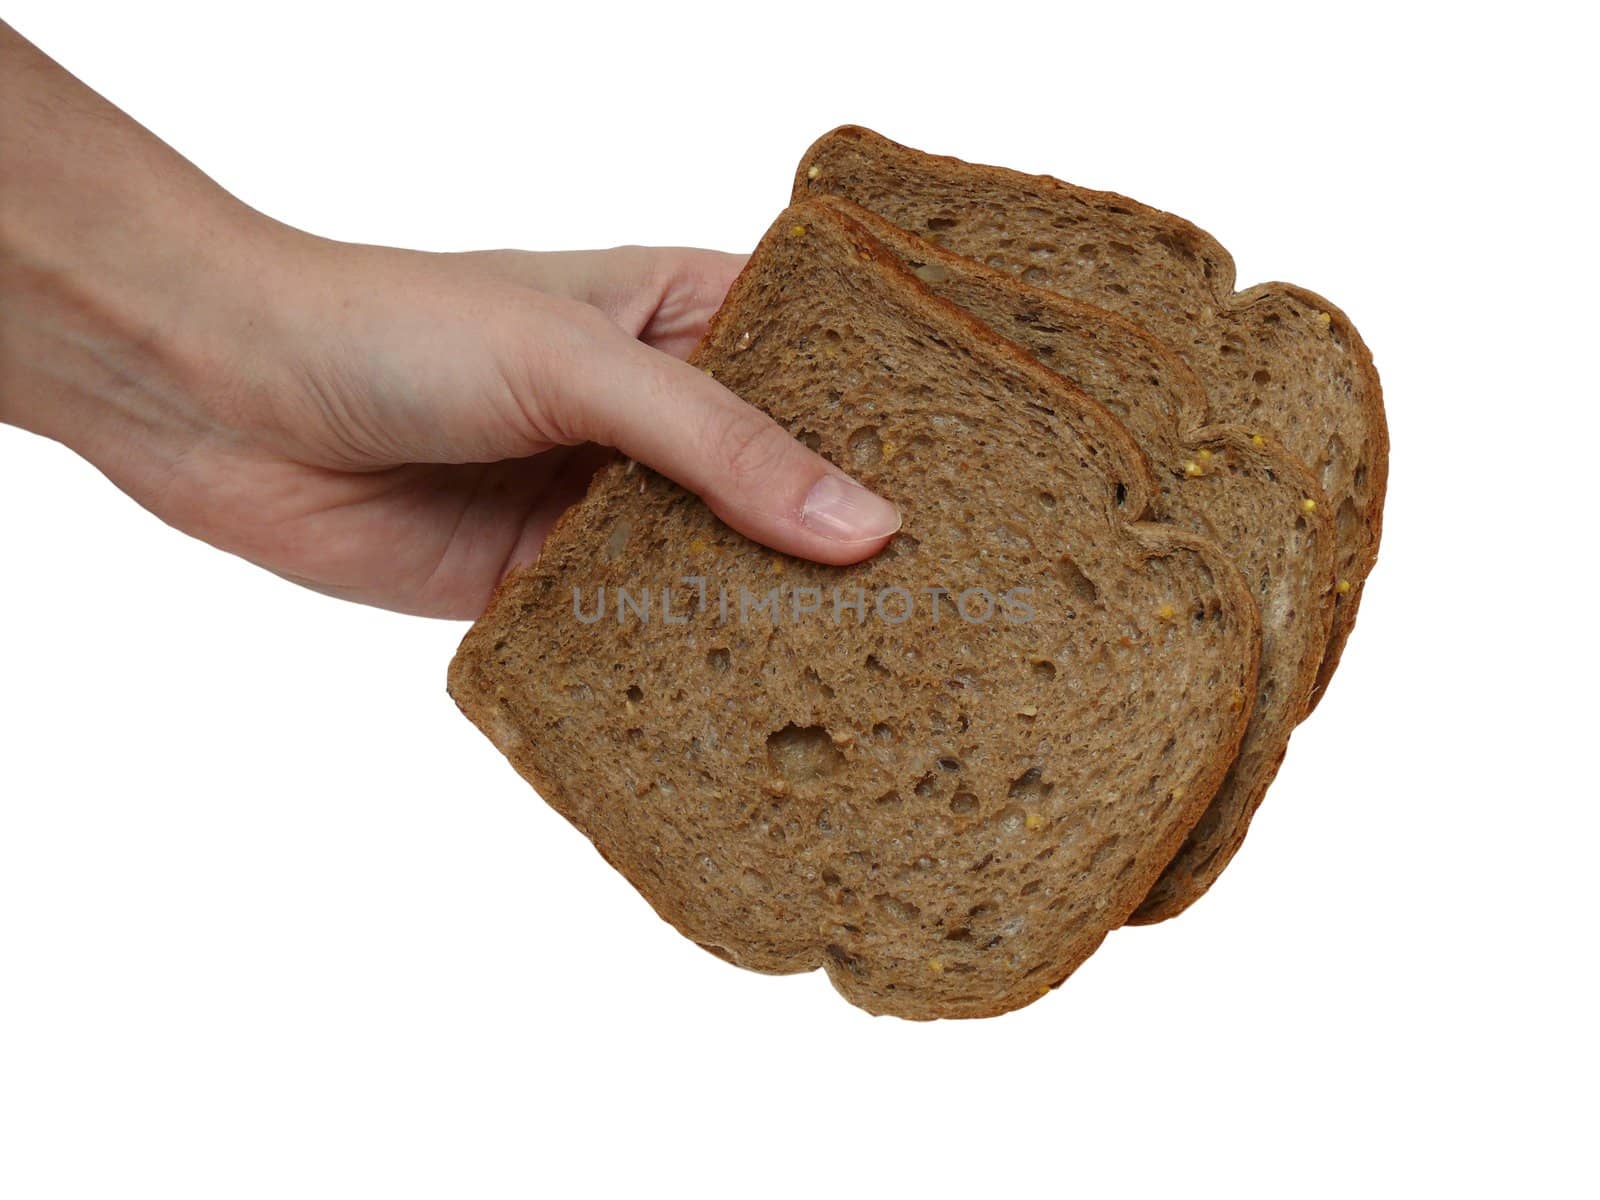 Hand holding three slices of cereal bread